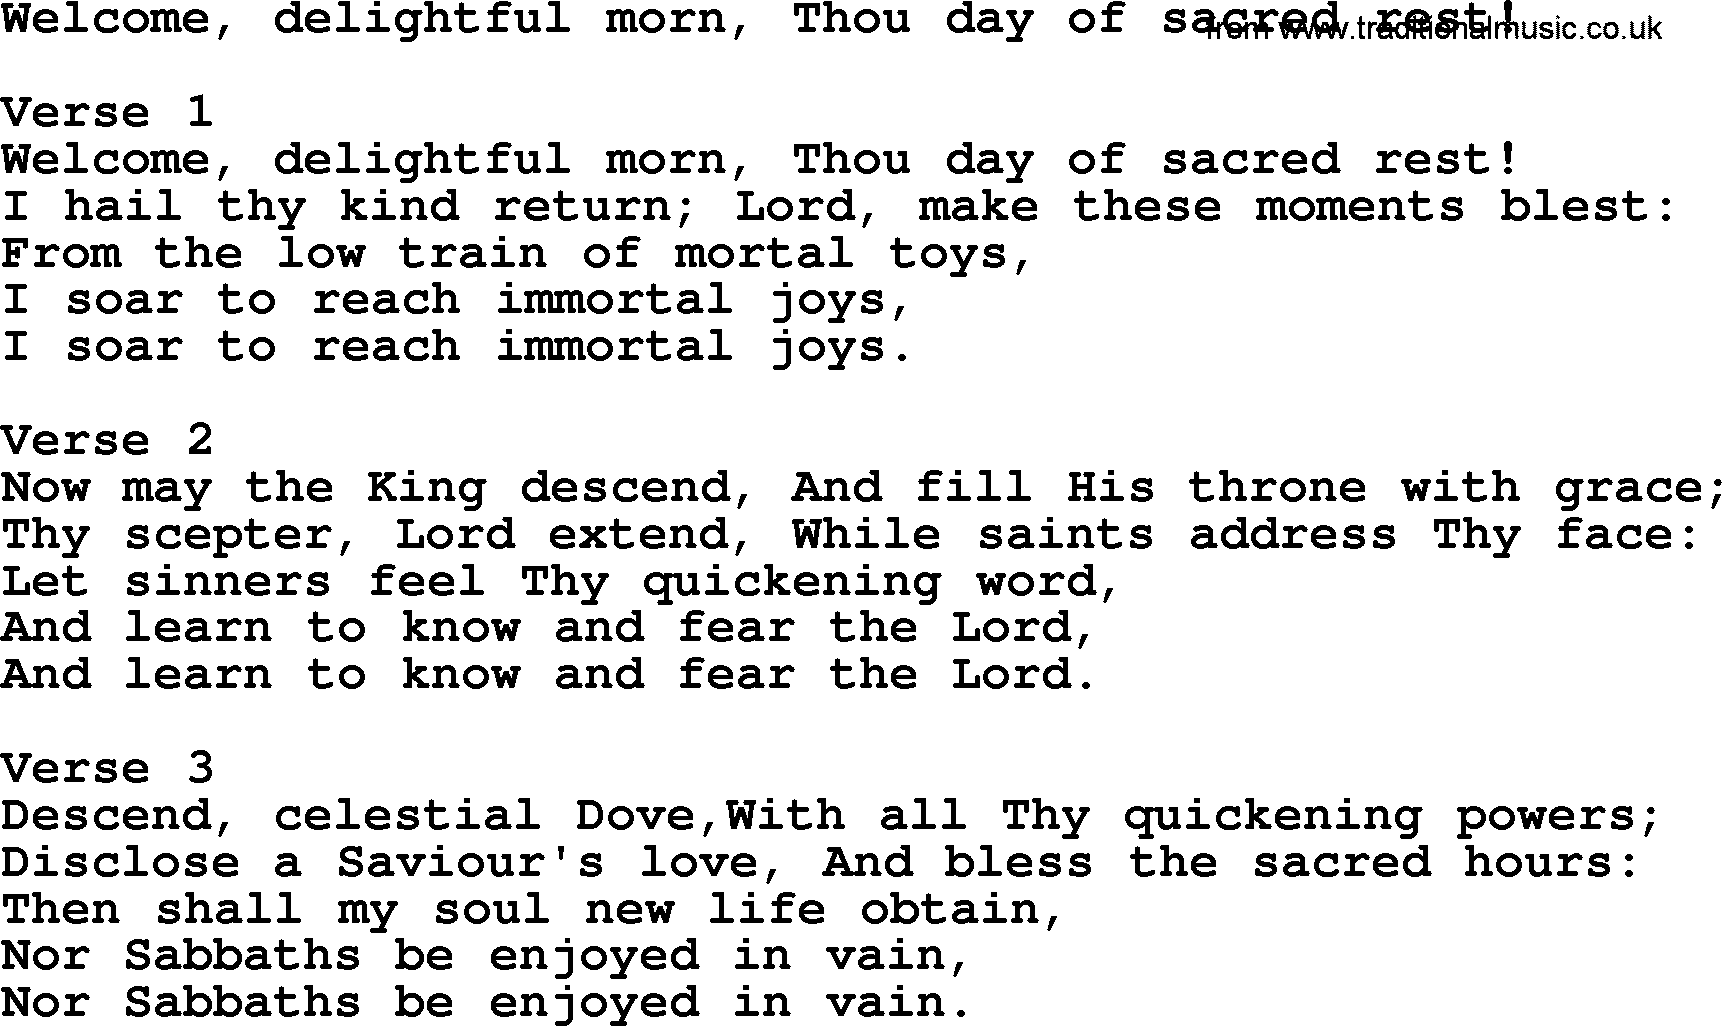 Apostolic and Pentecostal Hymns and Gospel Songs, Hymn: Welcome, Delightful Morn, Thou Day Of Sacred Rest!, Christian lyrics and PDF